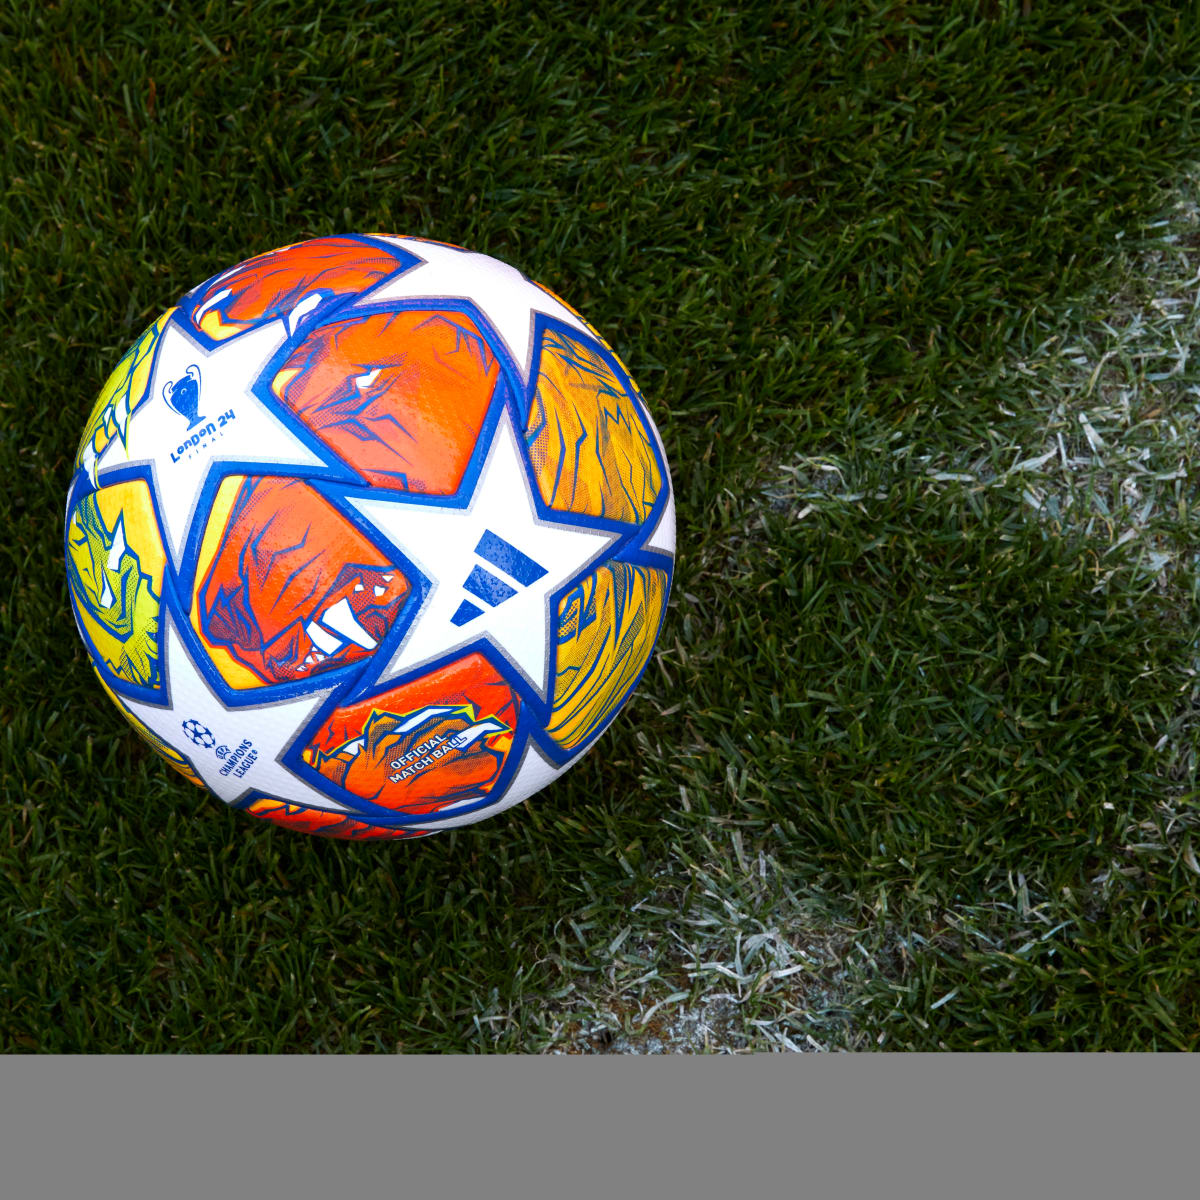 OFFICIAL MATCH BALL FOR MEN'S 2021/22 UEFA CHAMPIONS LEAGUE KNOCKOUTS